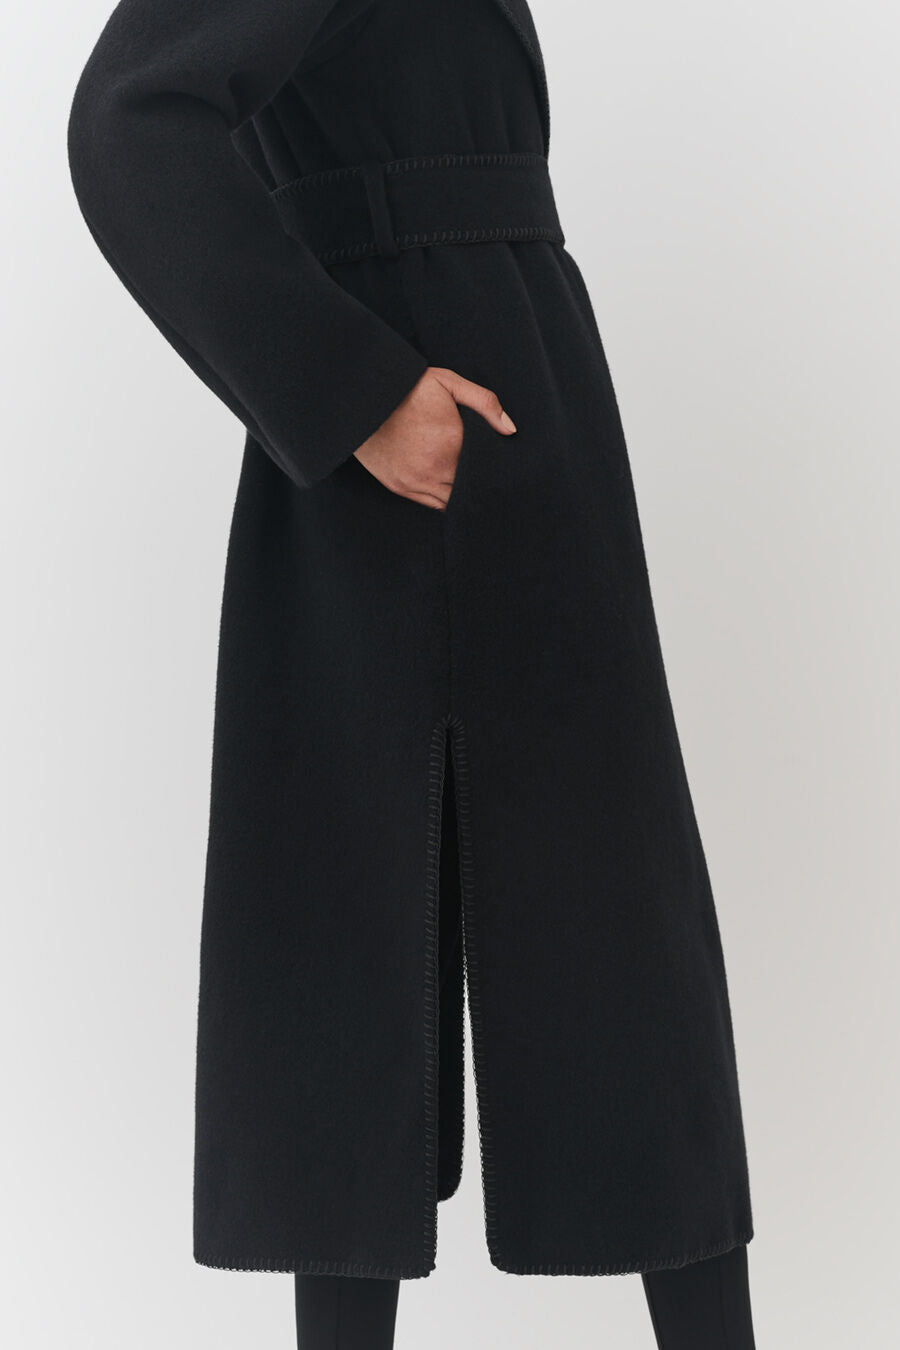 Person in a long coat with hand on hip, showing side zipper detail.